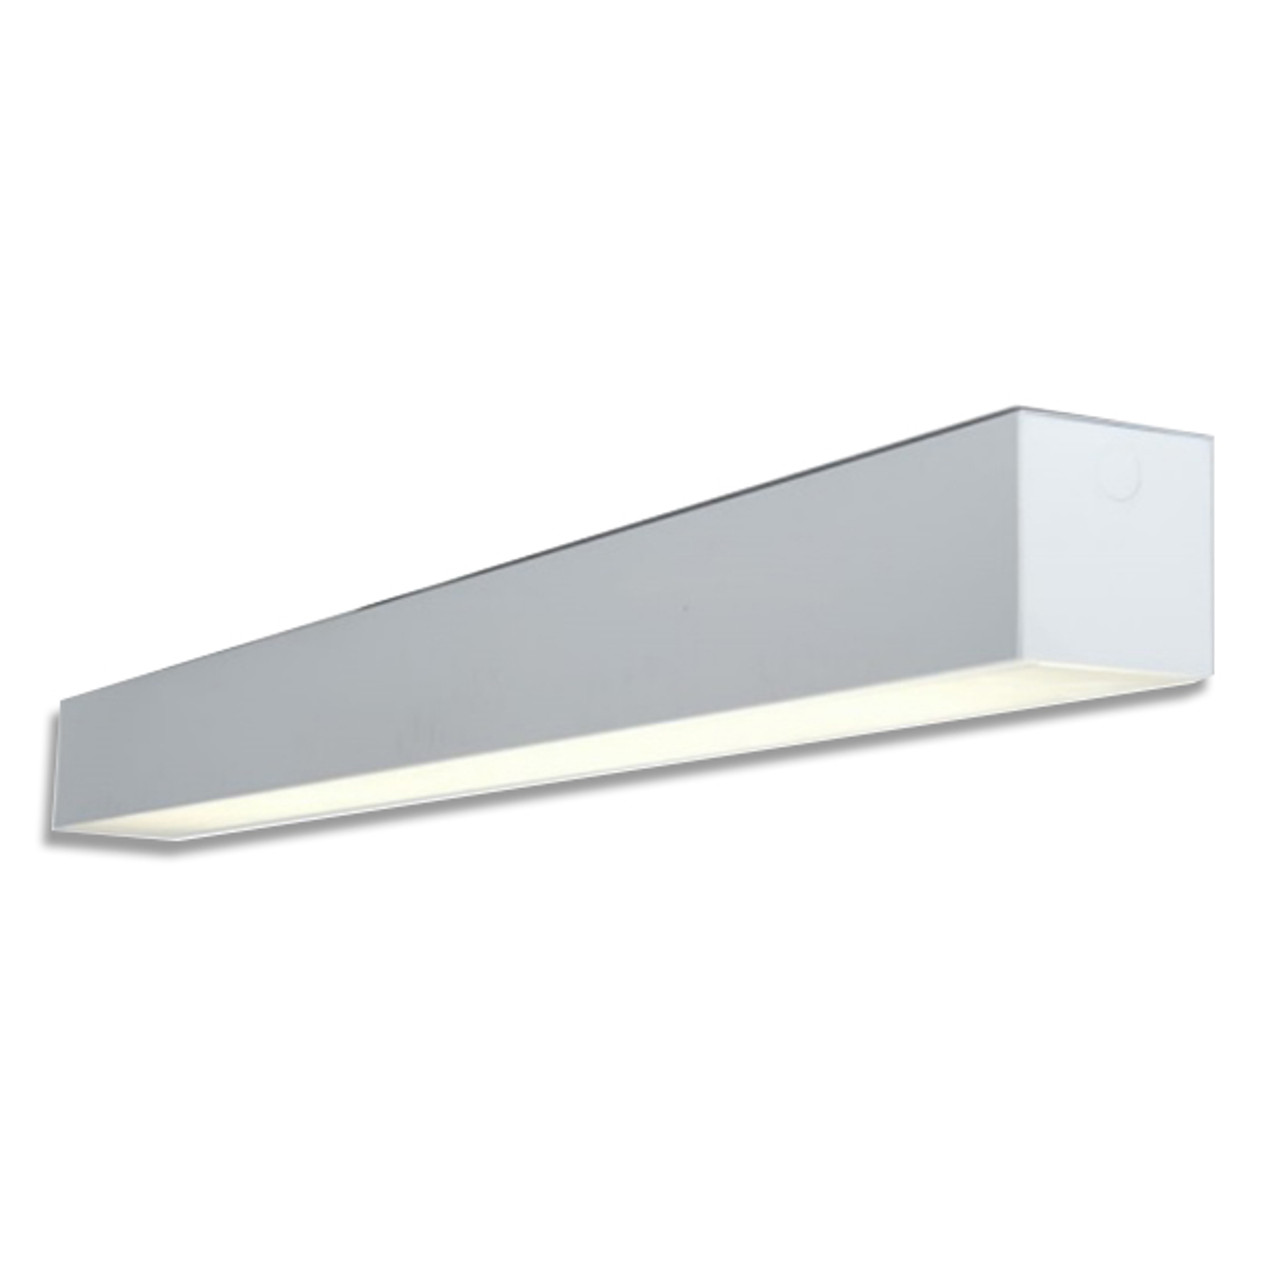 4Ft. LED Wall Mounted Linear Fixture, 24W or 48W